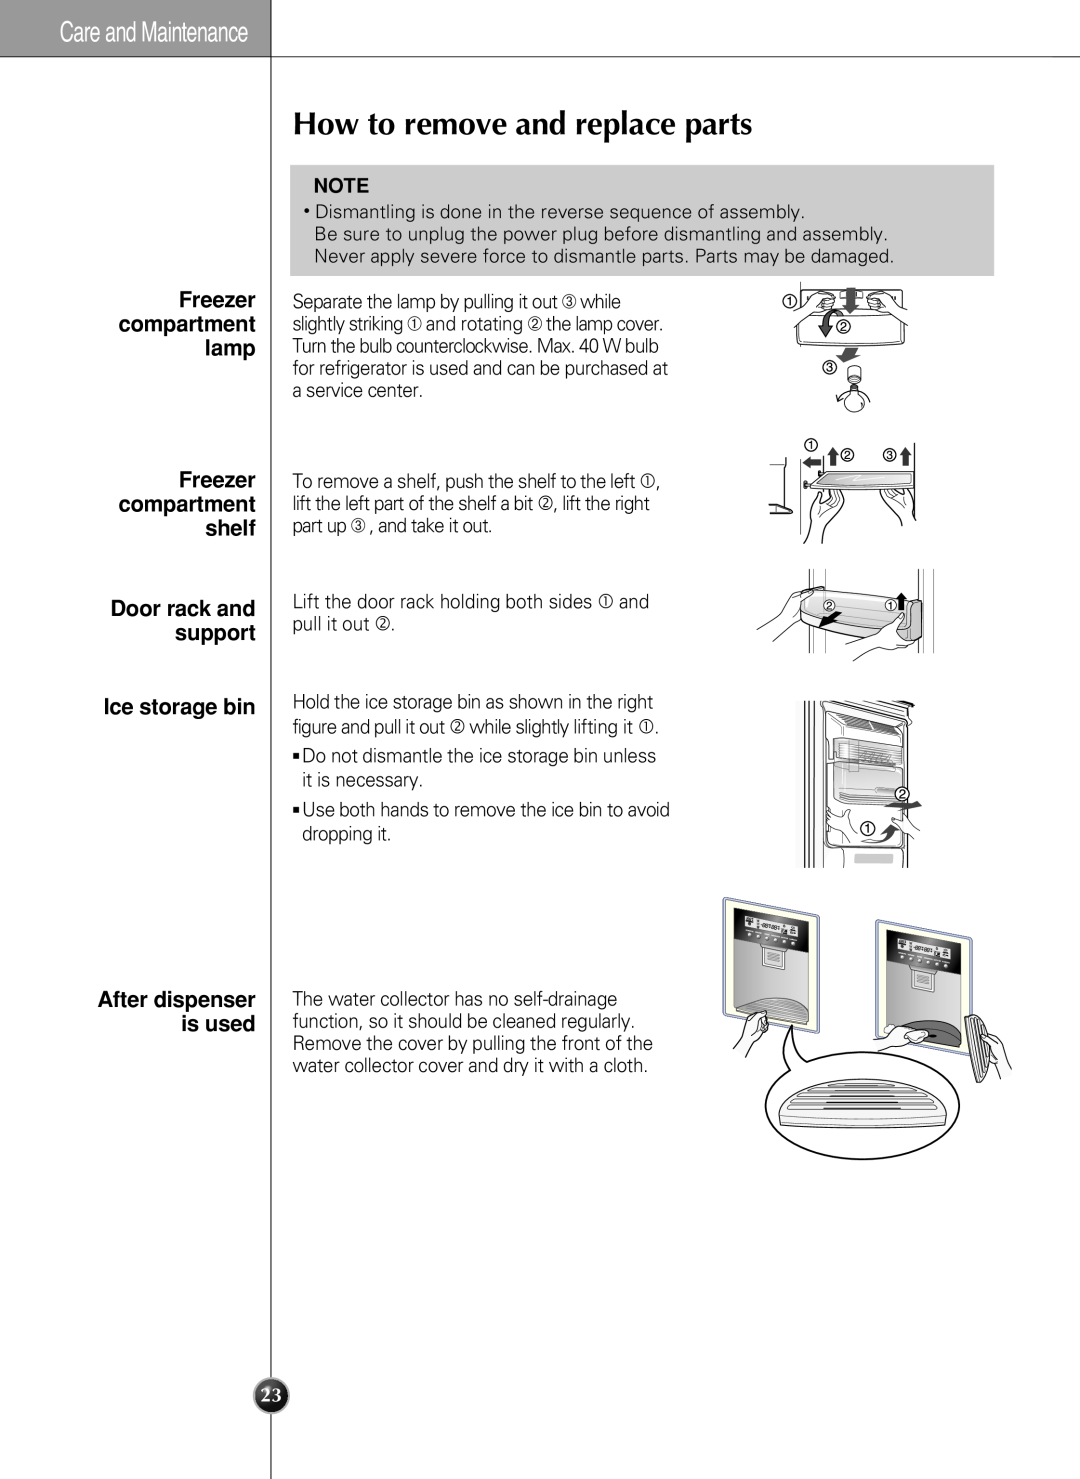 LG Electronics LSC 21943ST manual How to remove and replace parts, Care and Maintenance, After dispenser is used 